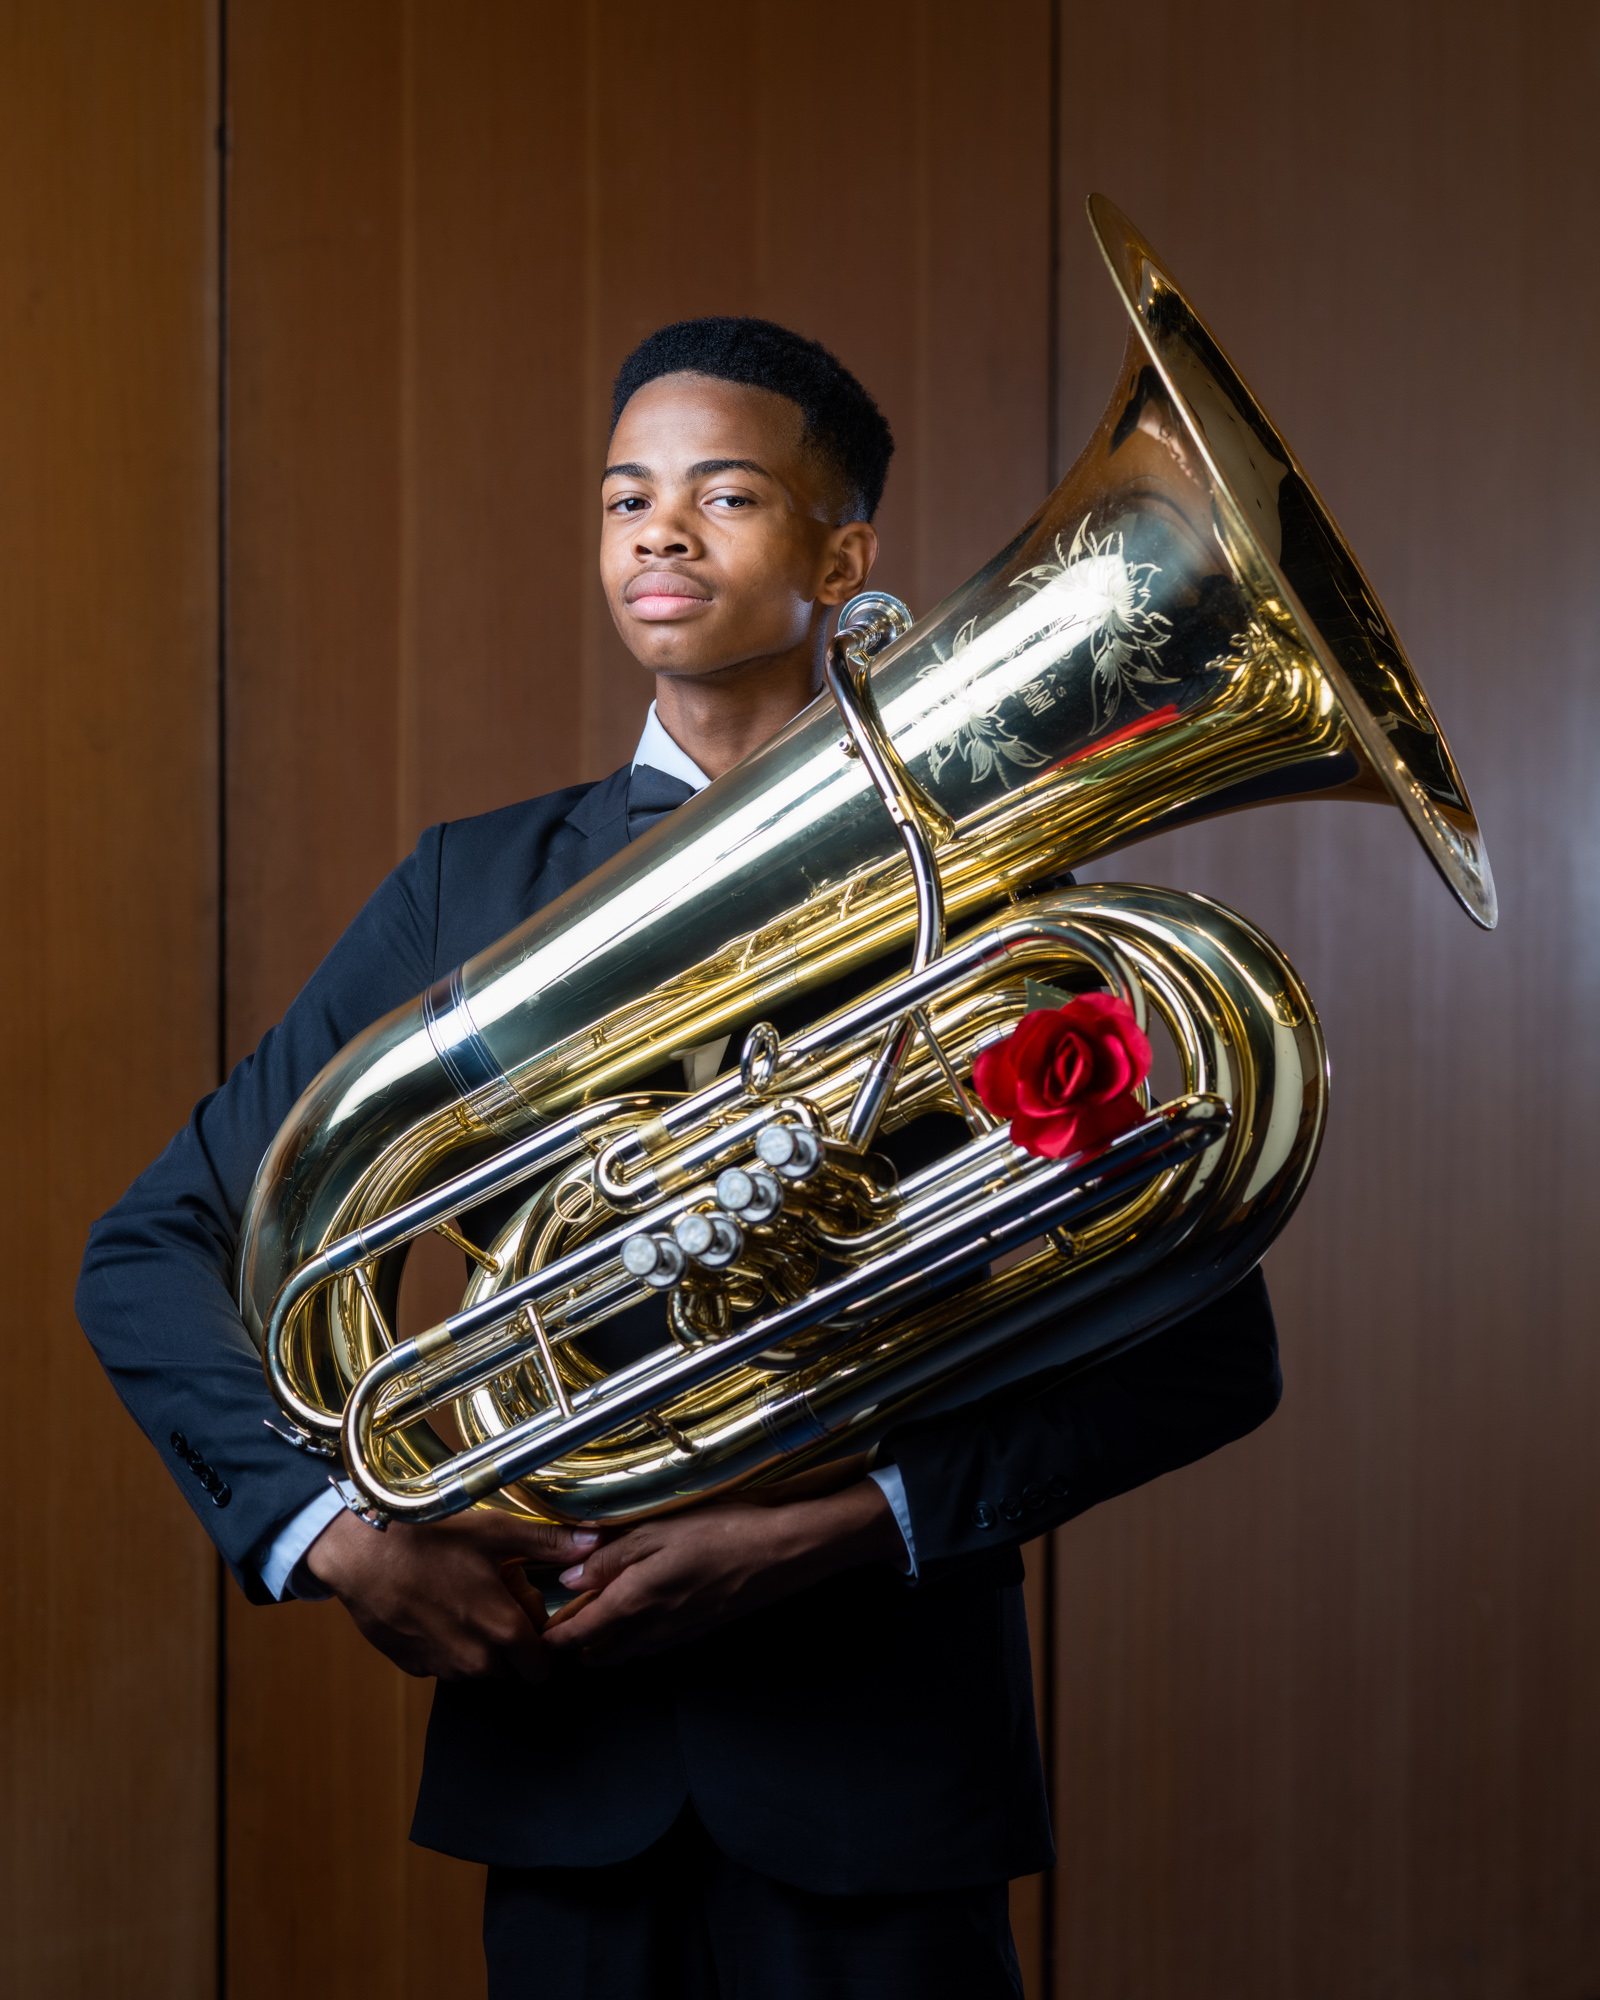 A young tuba player poses for a portrait in Los Angeles.